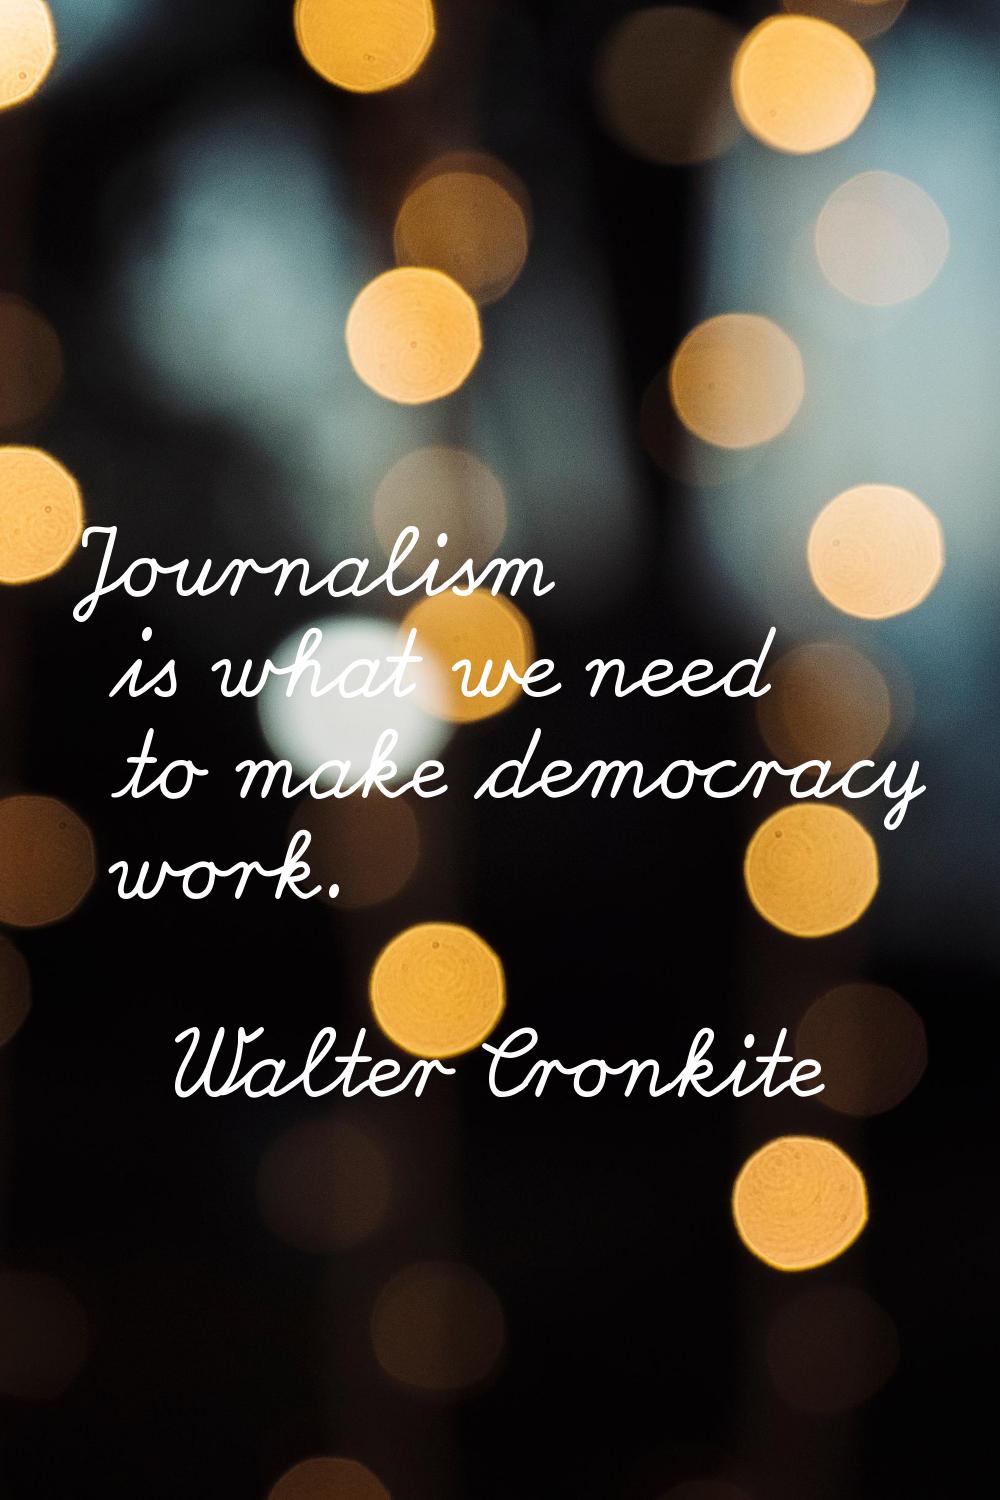 Journalism is what we need to make democracy work.